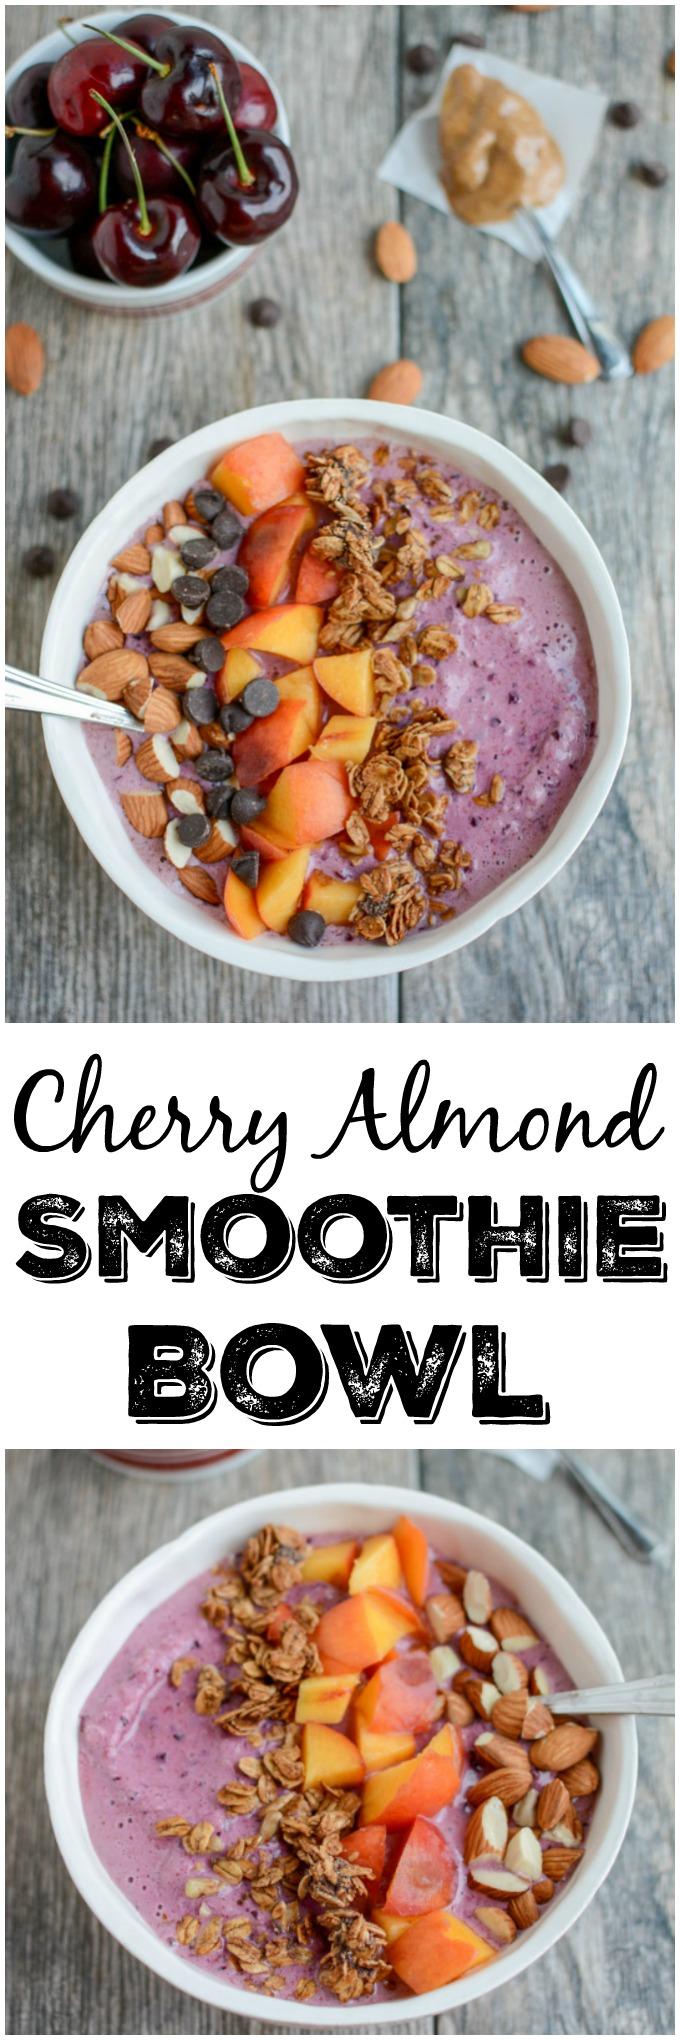 This Cherry Almond Smoothie Bowl recipe is full of healthy fats and protein for a healthy breakfast or snack on a hot day. Top with granola and nuts for an added crunch and dig in with a spoon!